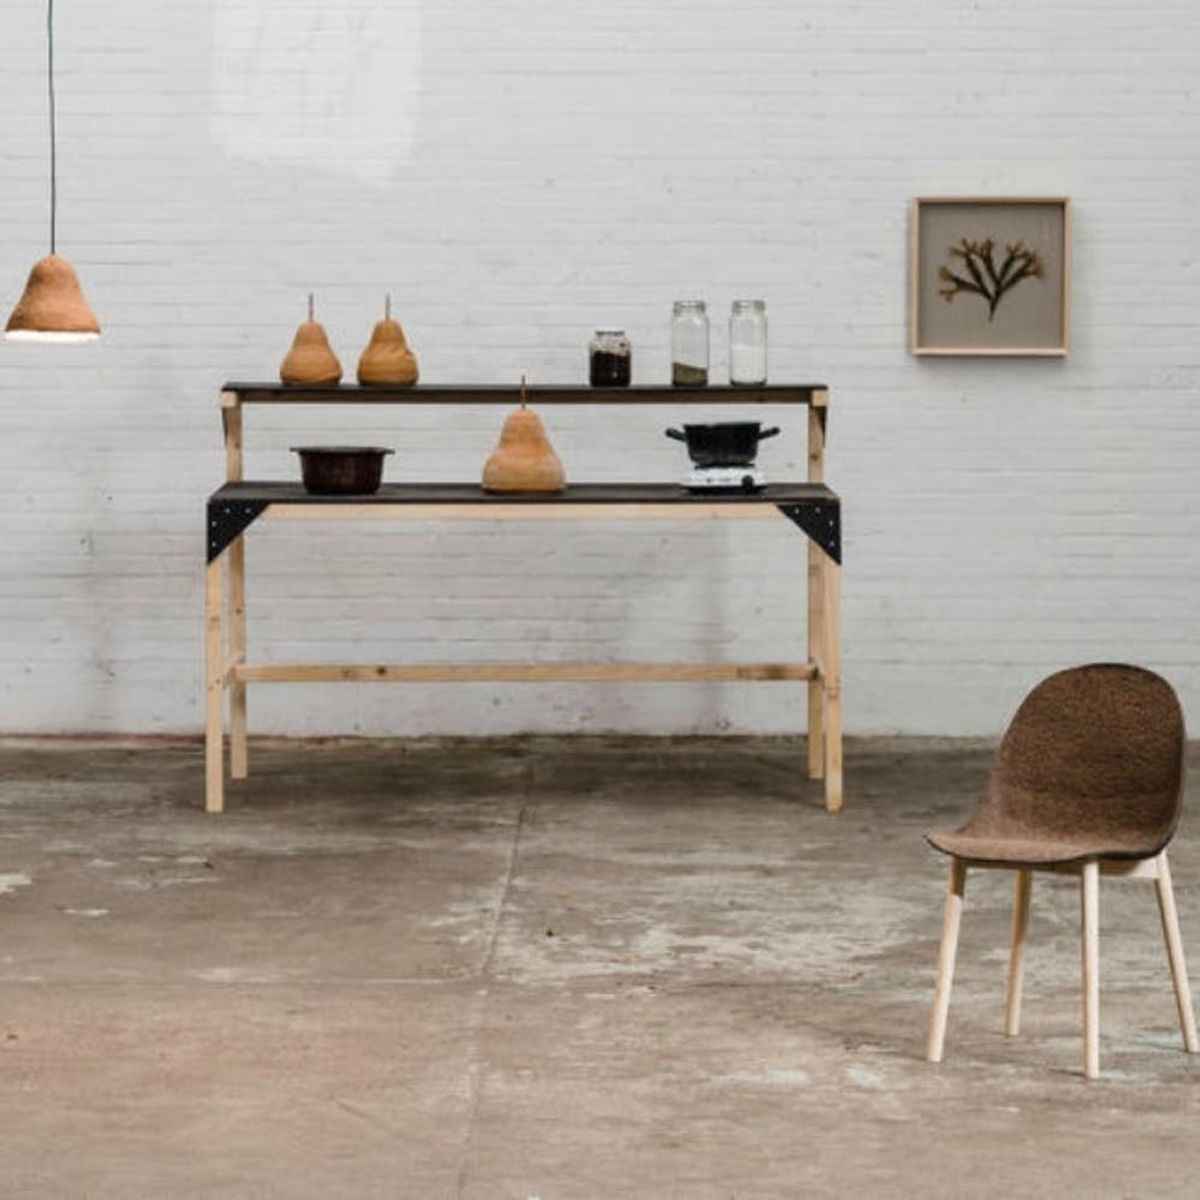 You’ll Never Believe What This Pretty Furniture Is Made from